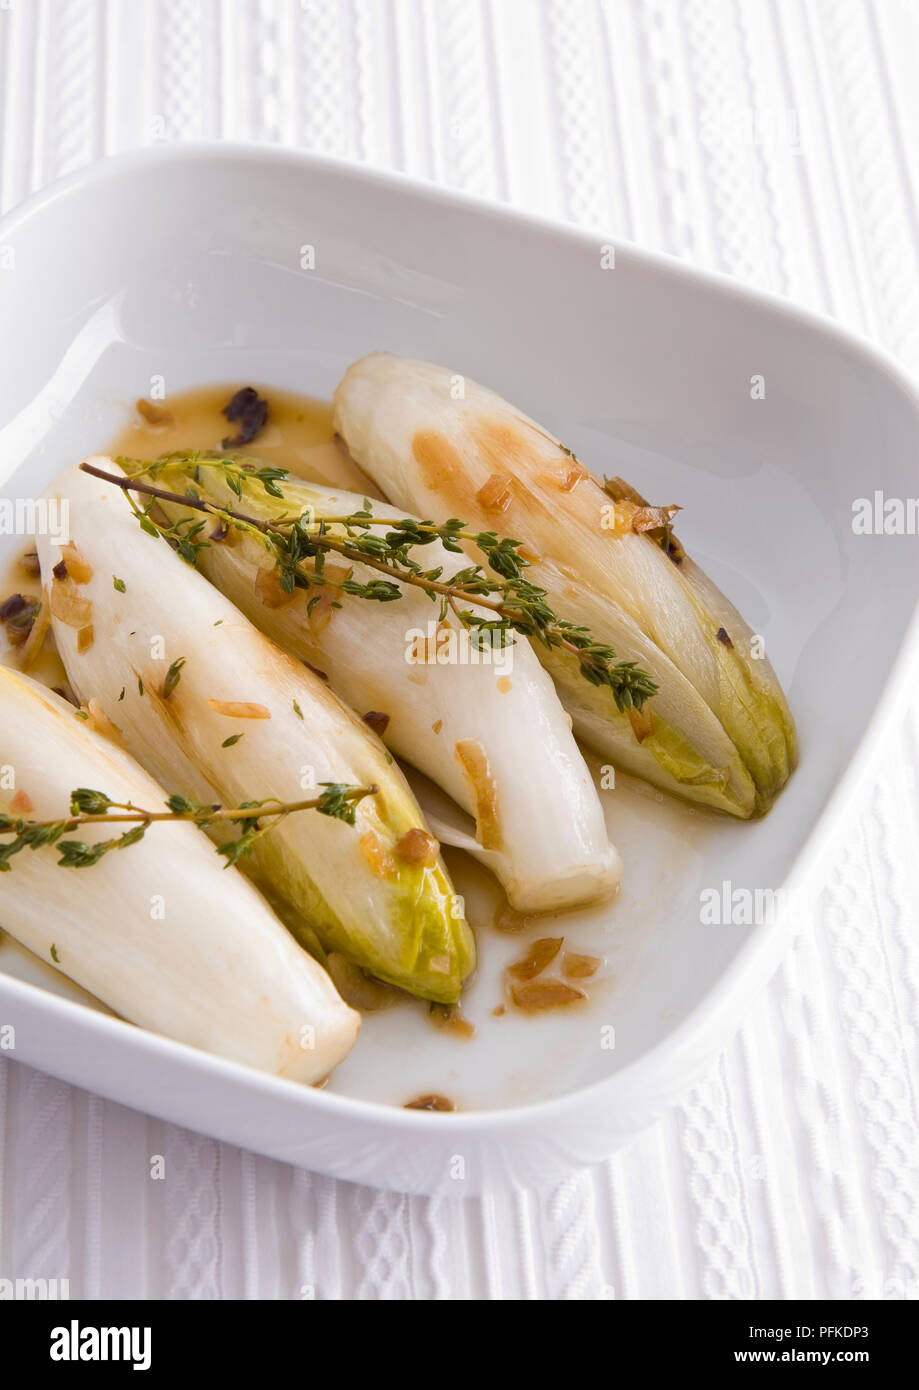 Braised chicory with shallots and thyme, in ceramic dish, on patterned tablecloth, close-up Stock Photo